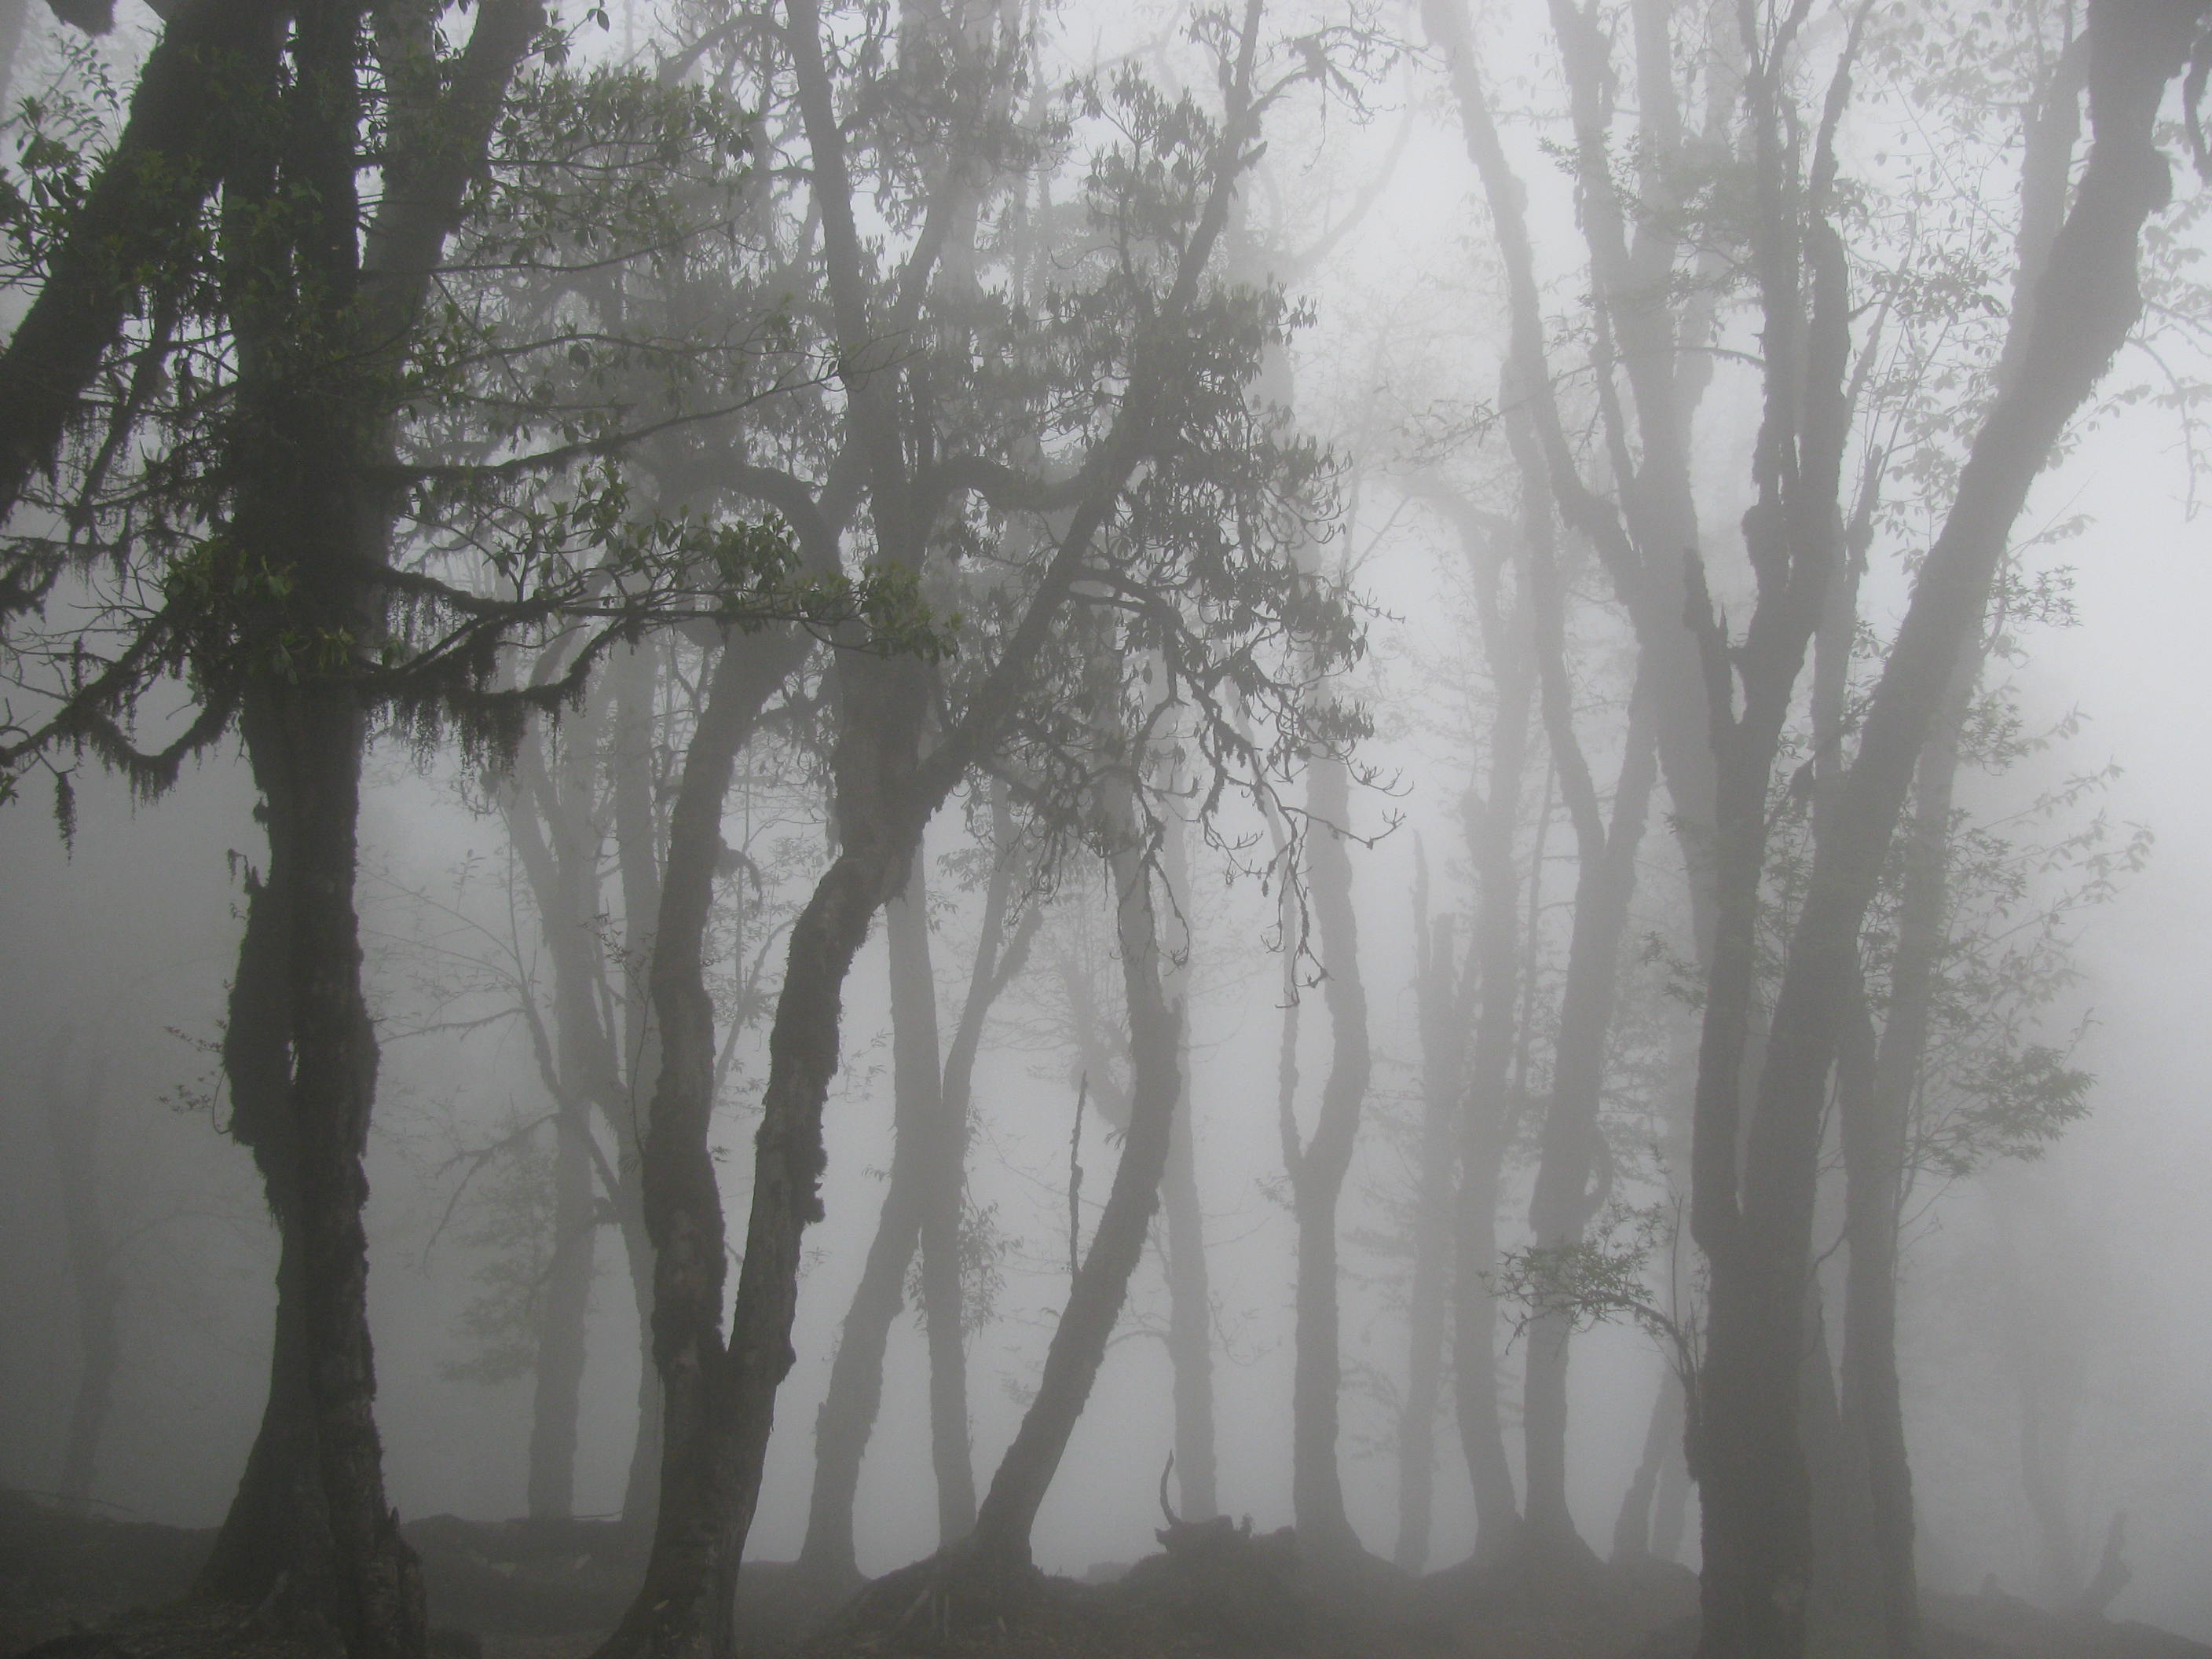 I liked the way trees standing in the forest and fog in the background.I was amazed to see this moment for while as if dreaming!I took this photo in the Bakhim Forest,located at Khanchanjunga National Park Area.Shot taken in the early morning